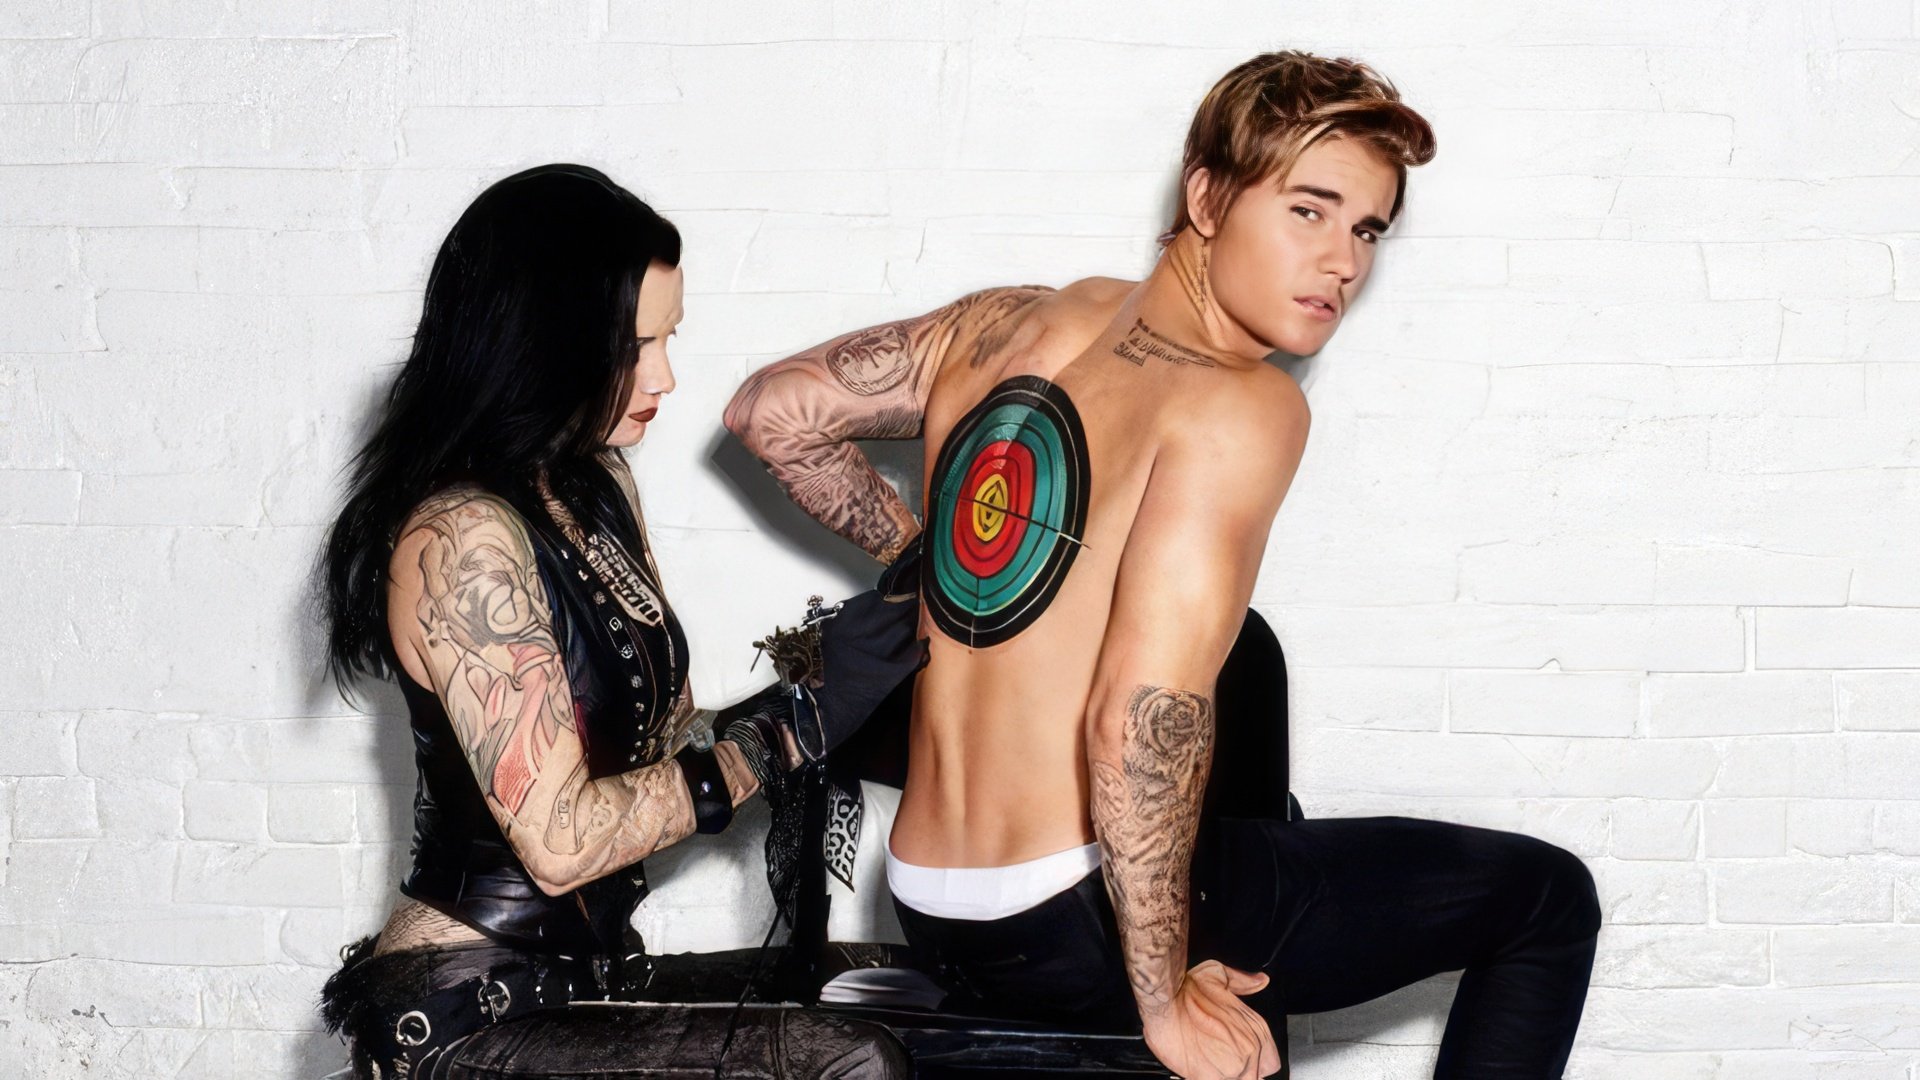 Justin Bieber and his tattoos